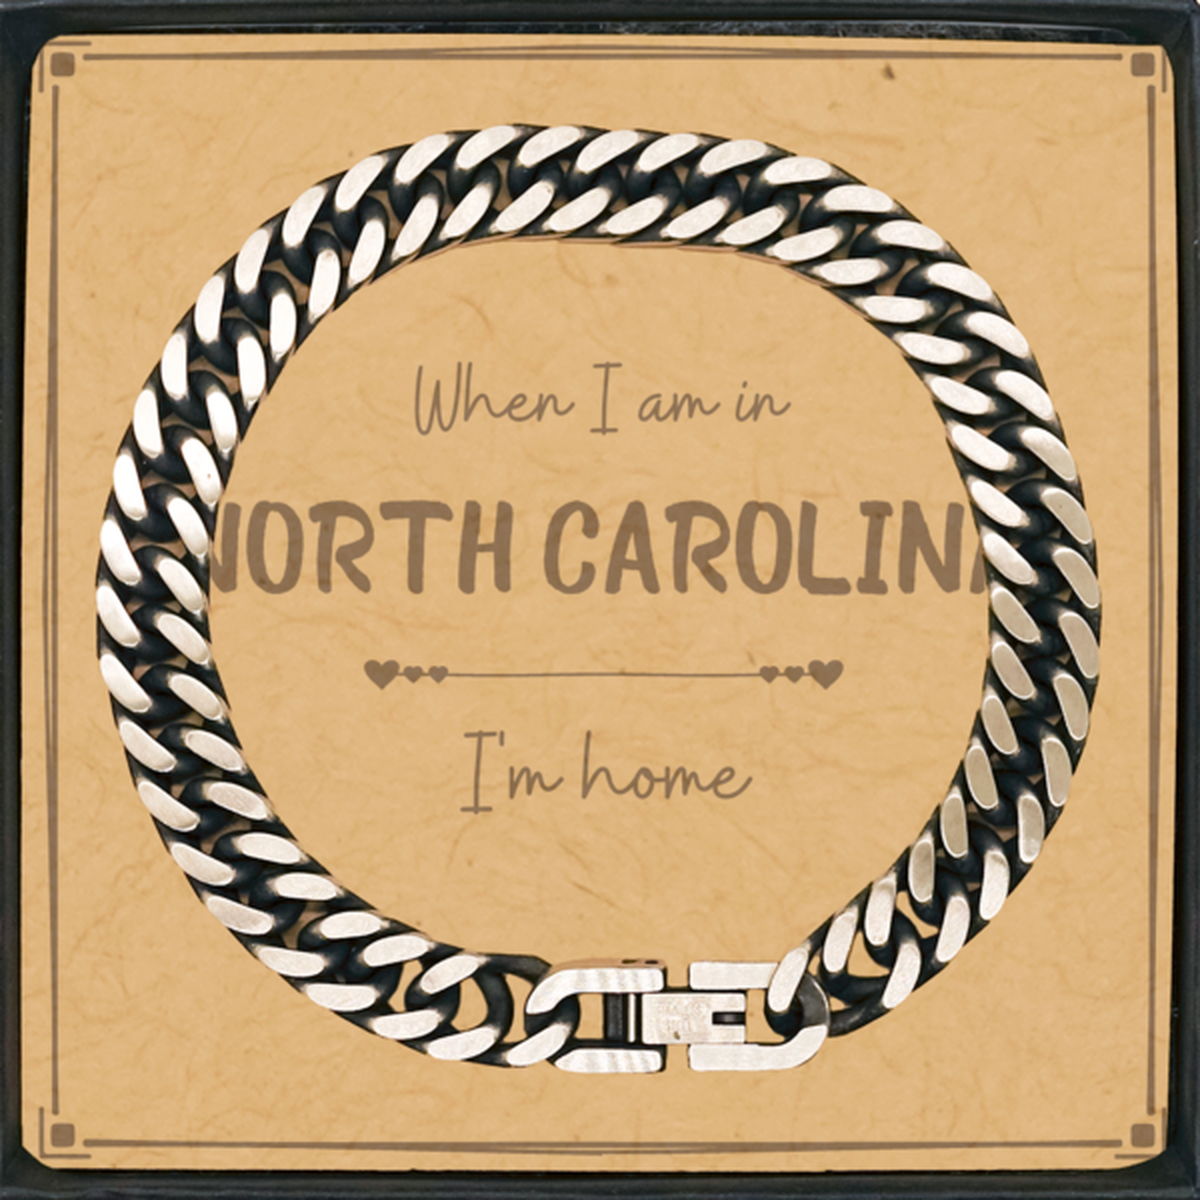 When I am in North Carolina I'm home Cuban Link Chain Bracelet, Message Card Gifts For North Carolina, State North Carolina Birthday Gifts for Friends Coworker